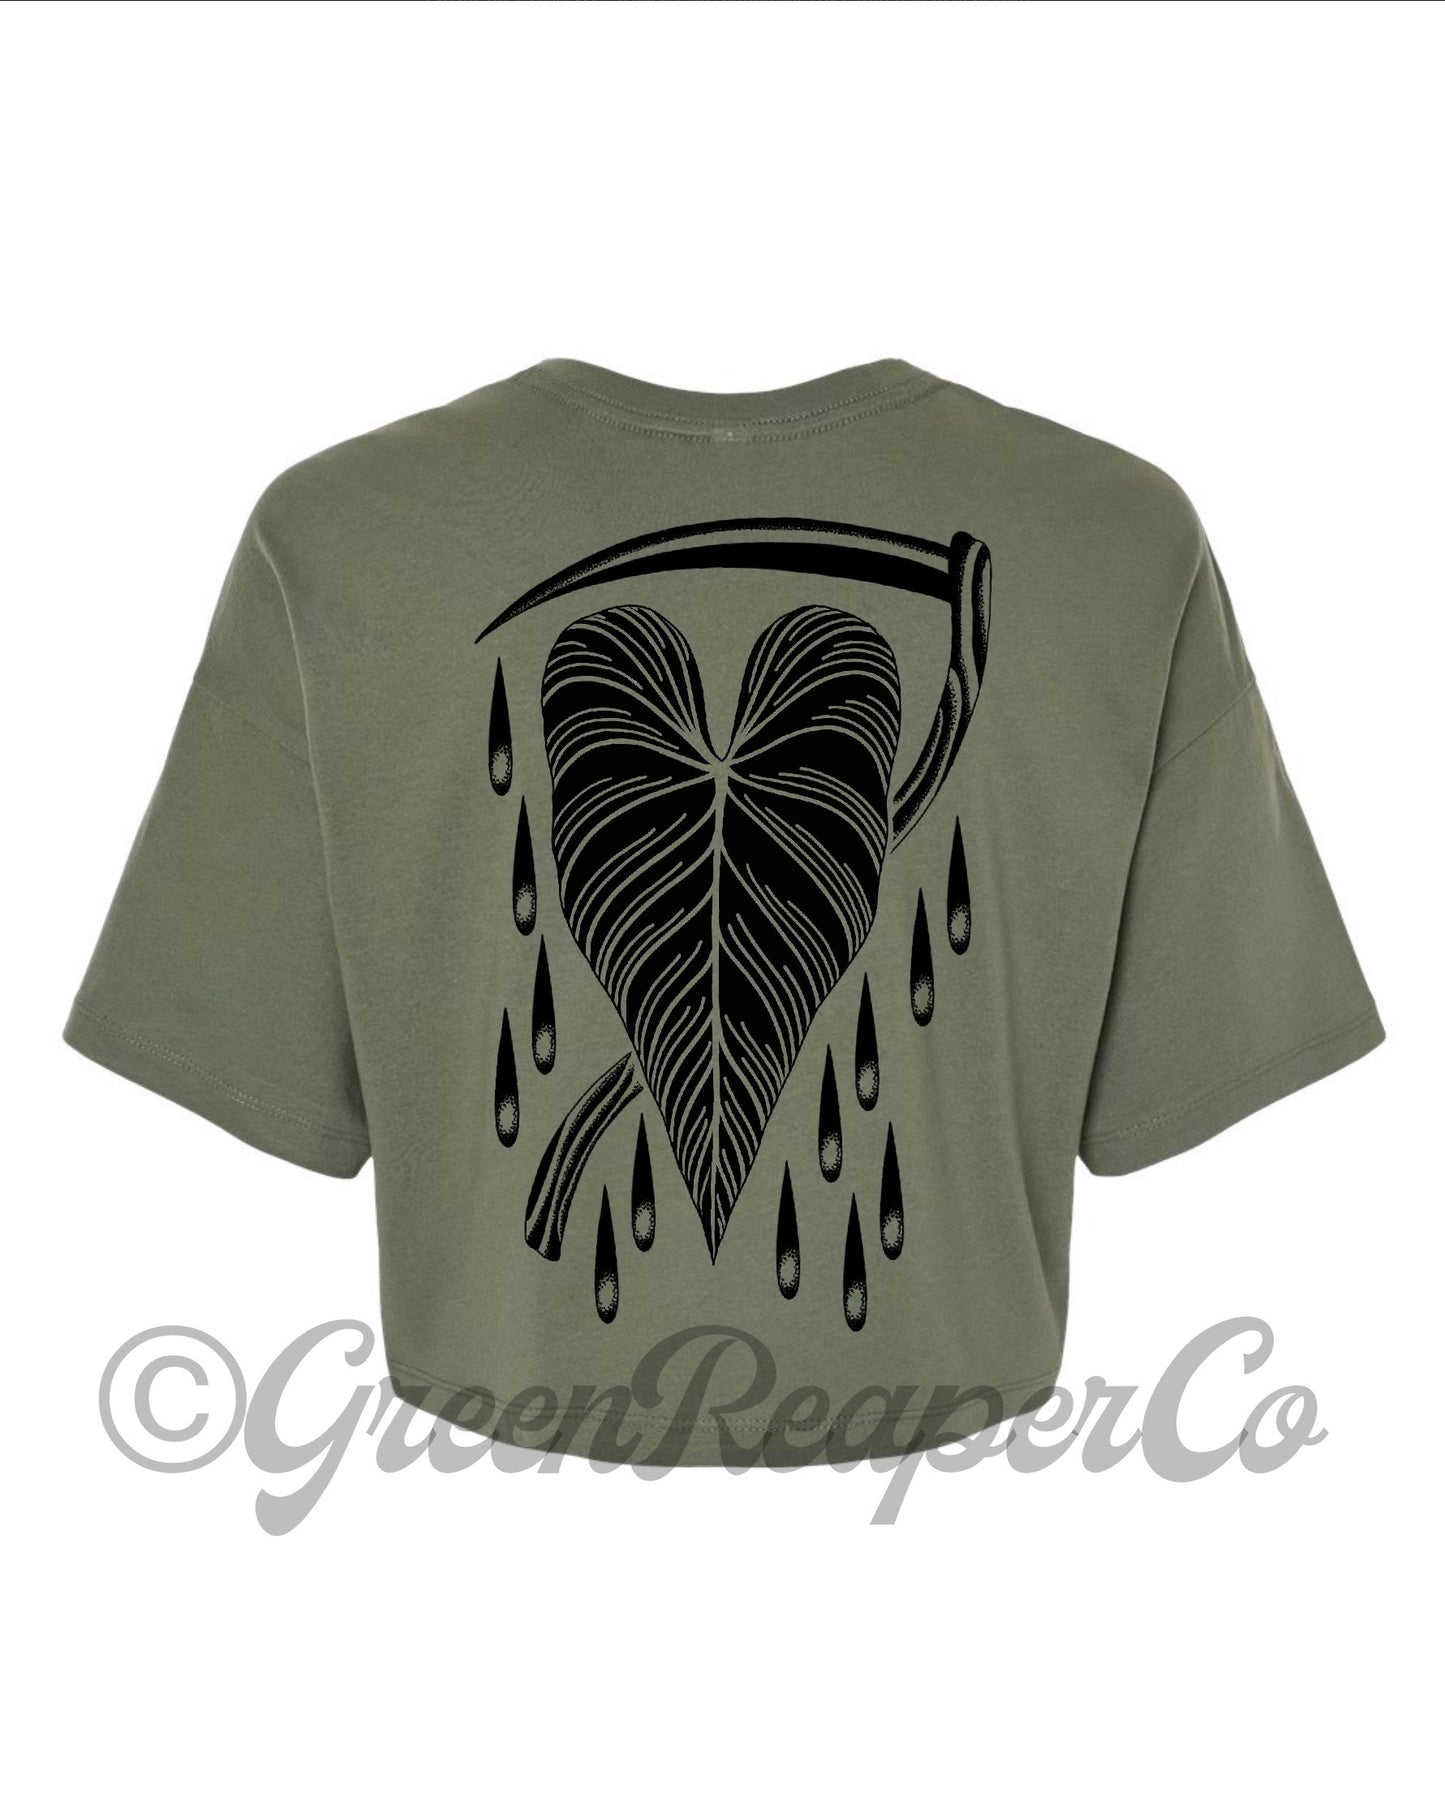 “There Better Be Plants” Reaper Leaf Crop T